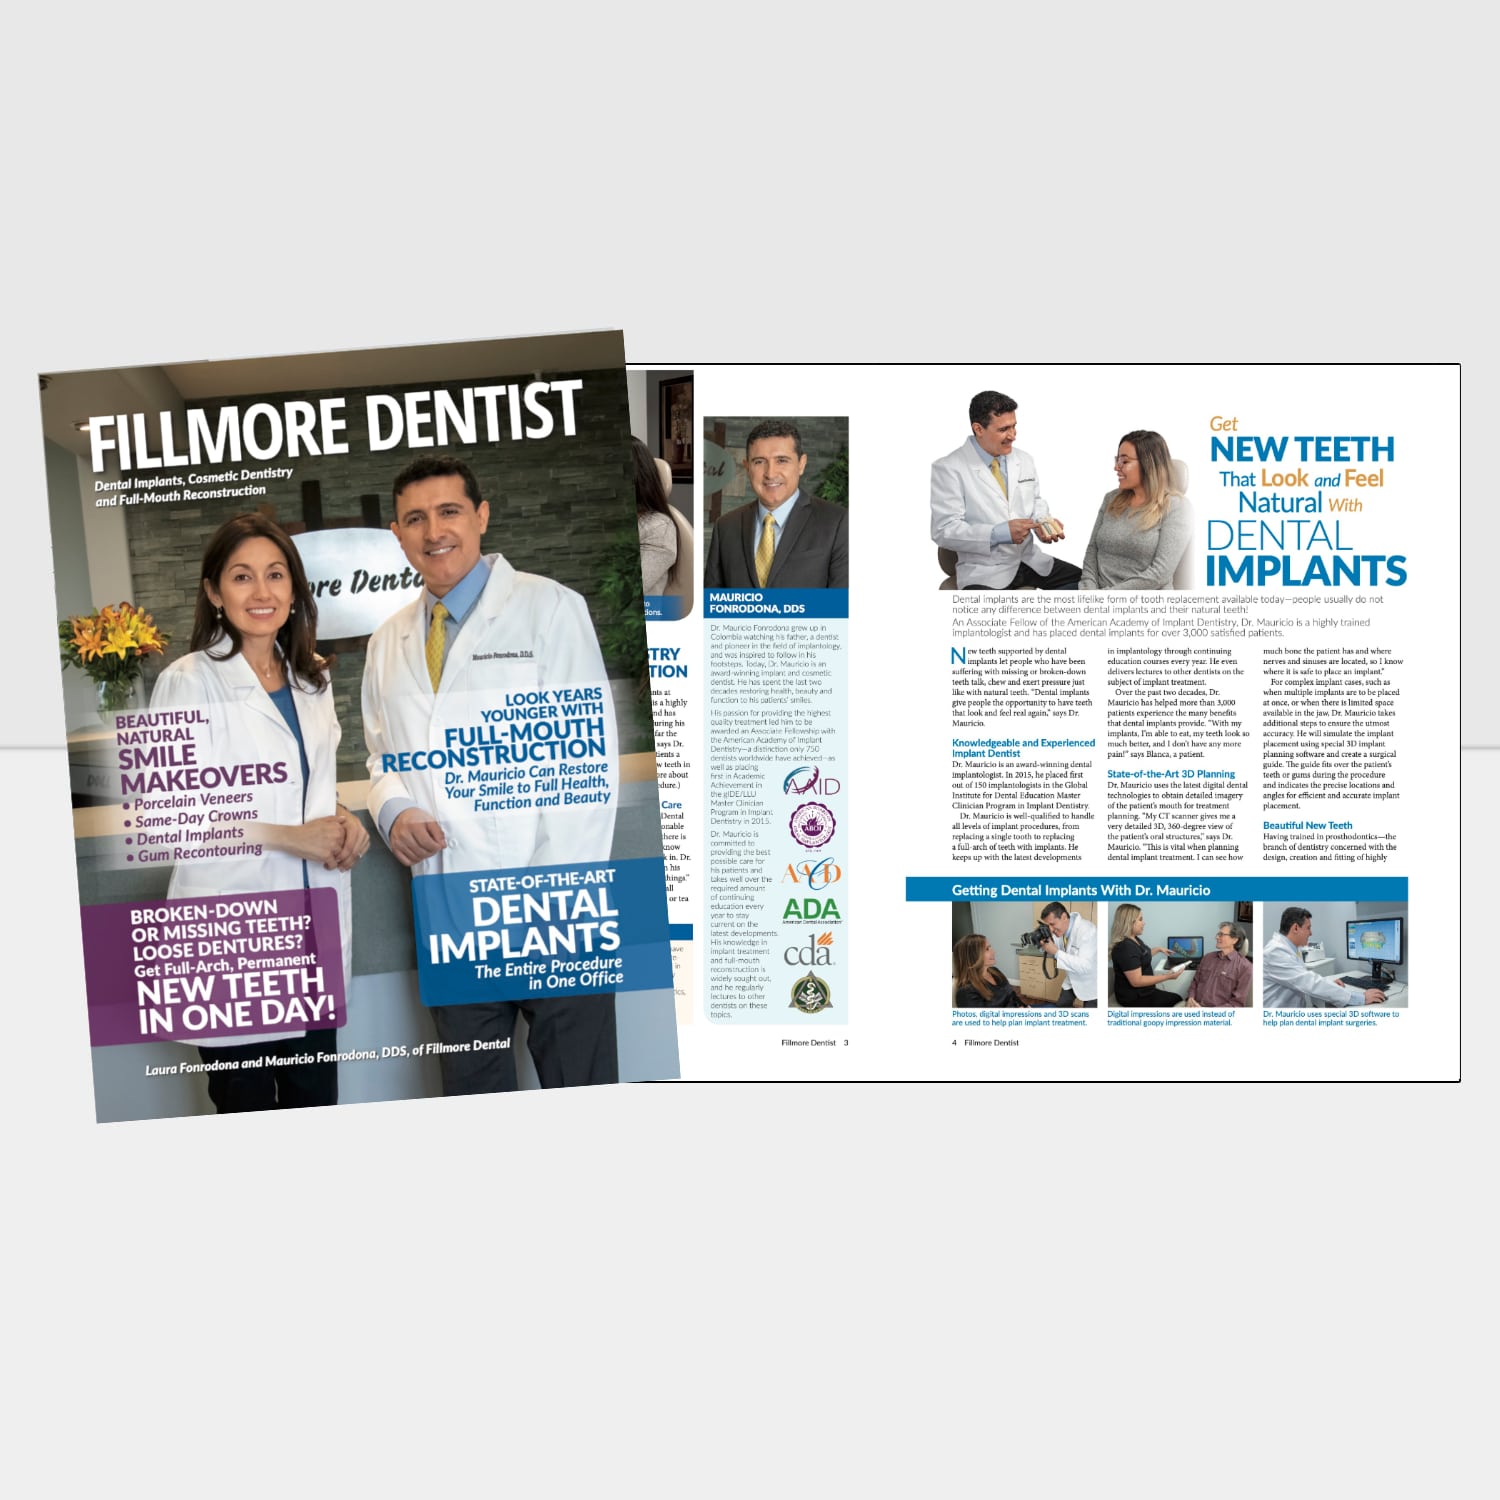 Mockup of the Fillmore Dental Group in Pasadena, CA dental magazine created by Gilleard Marketing for effective marketing for prosthodontists.